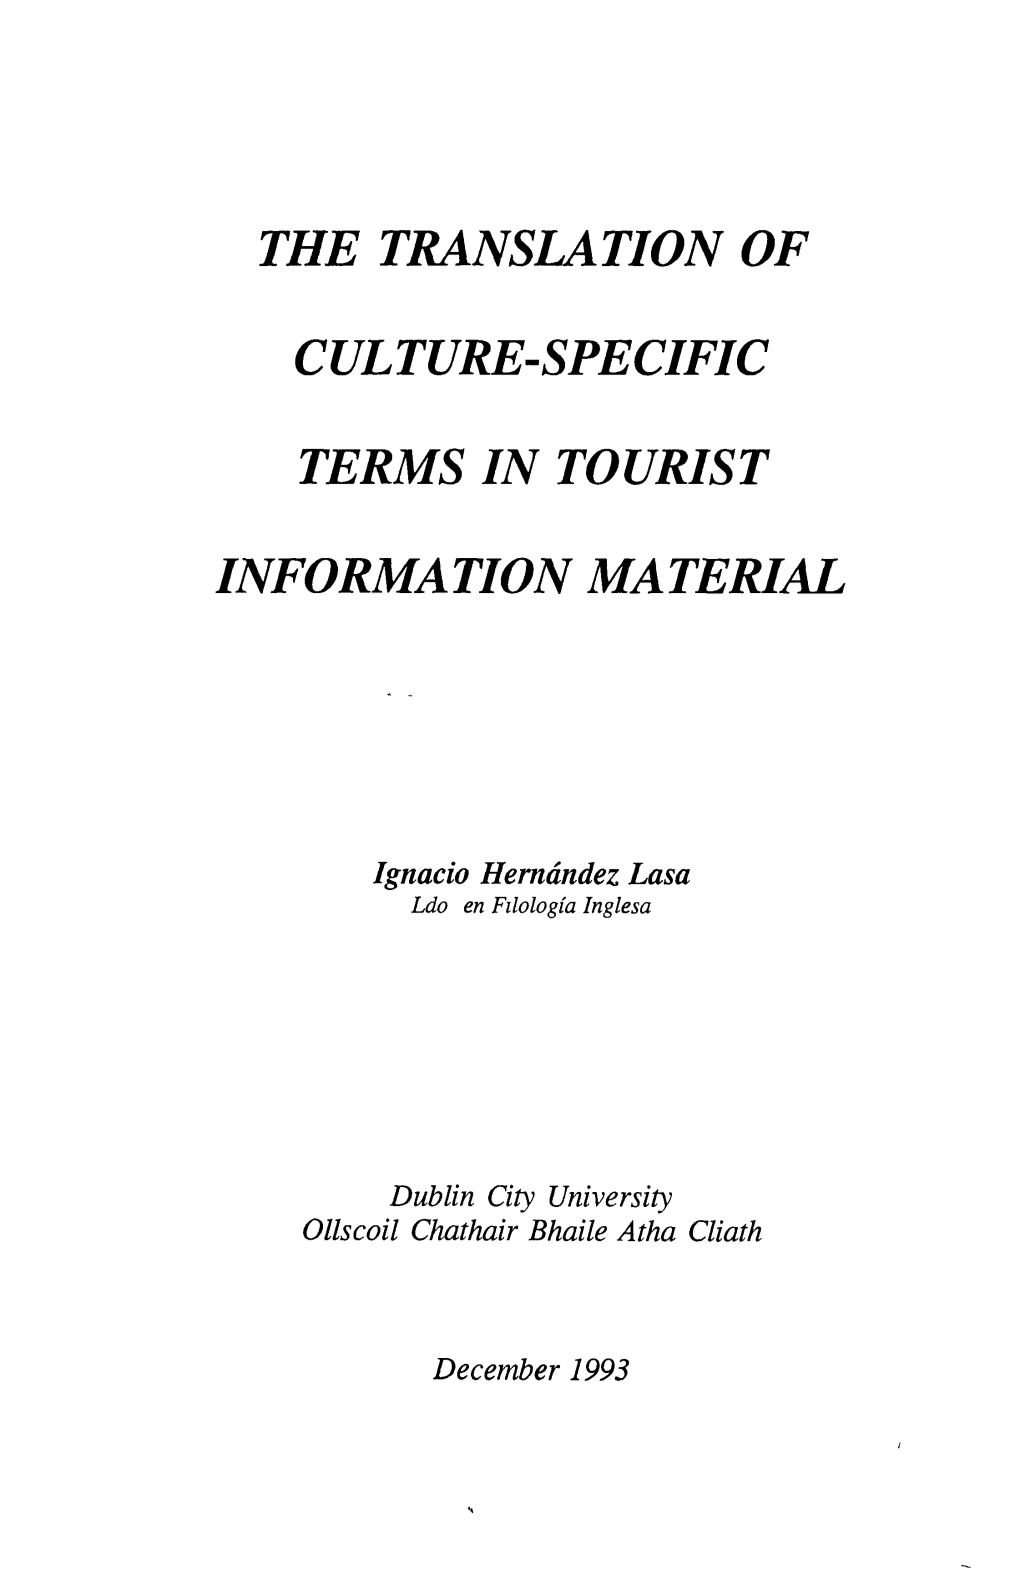 The Translation of Culture-Specific Terms in Tourist Information Material